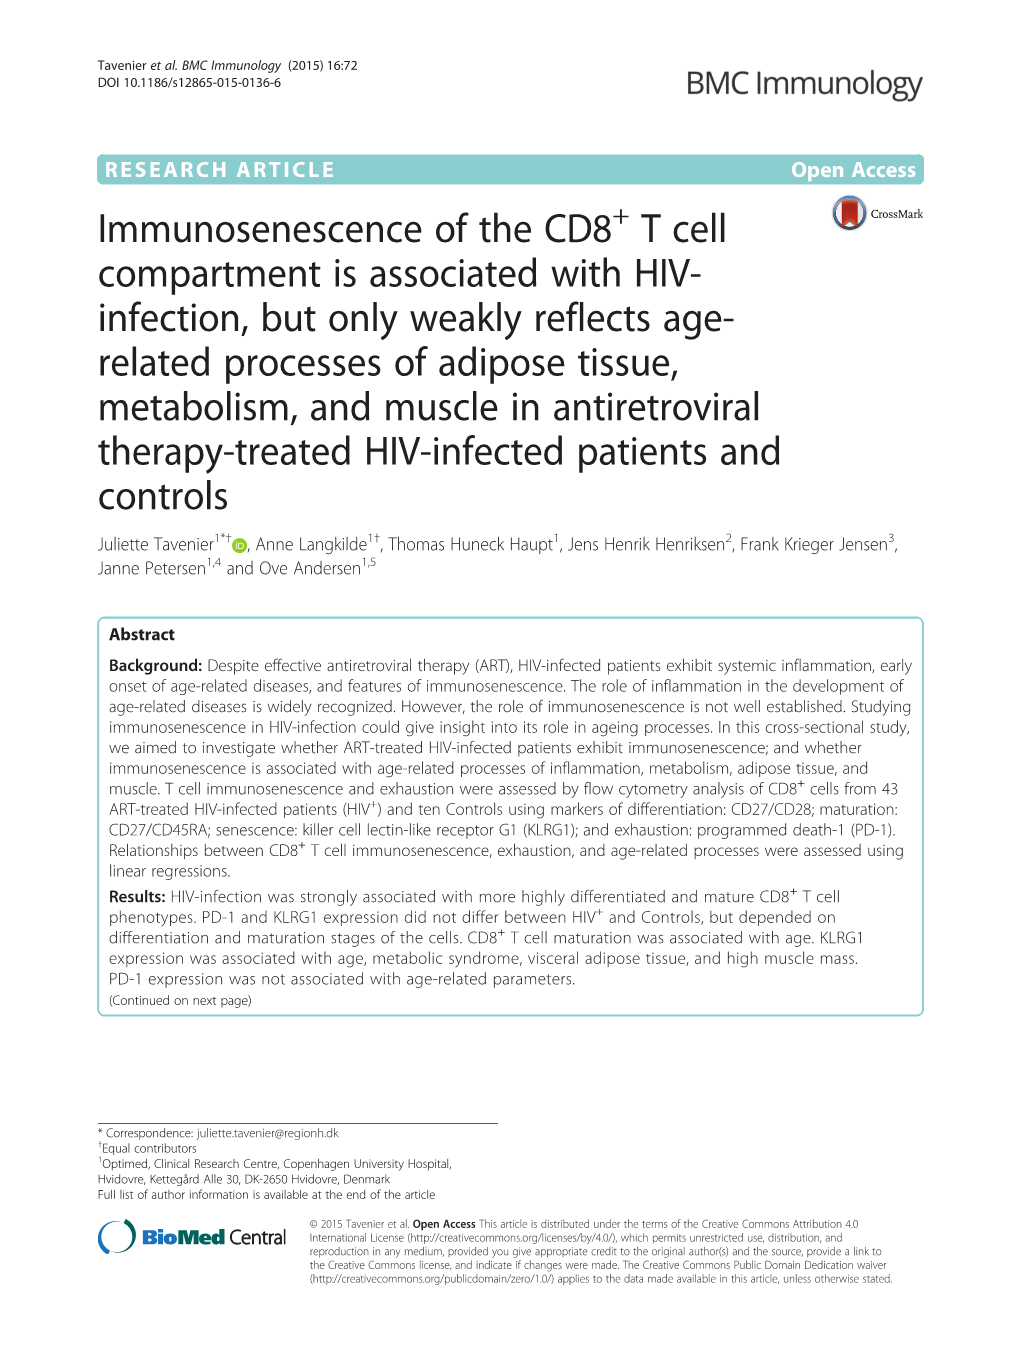 Immunosenescence of the CD8+ T Cell Compartment Is Associated With